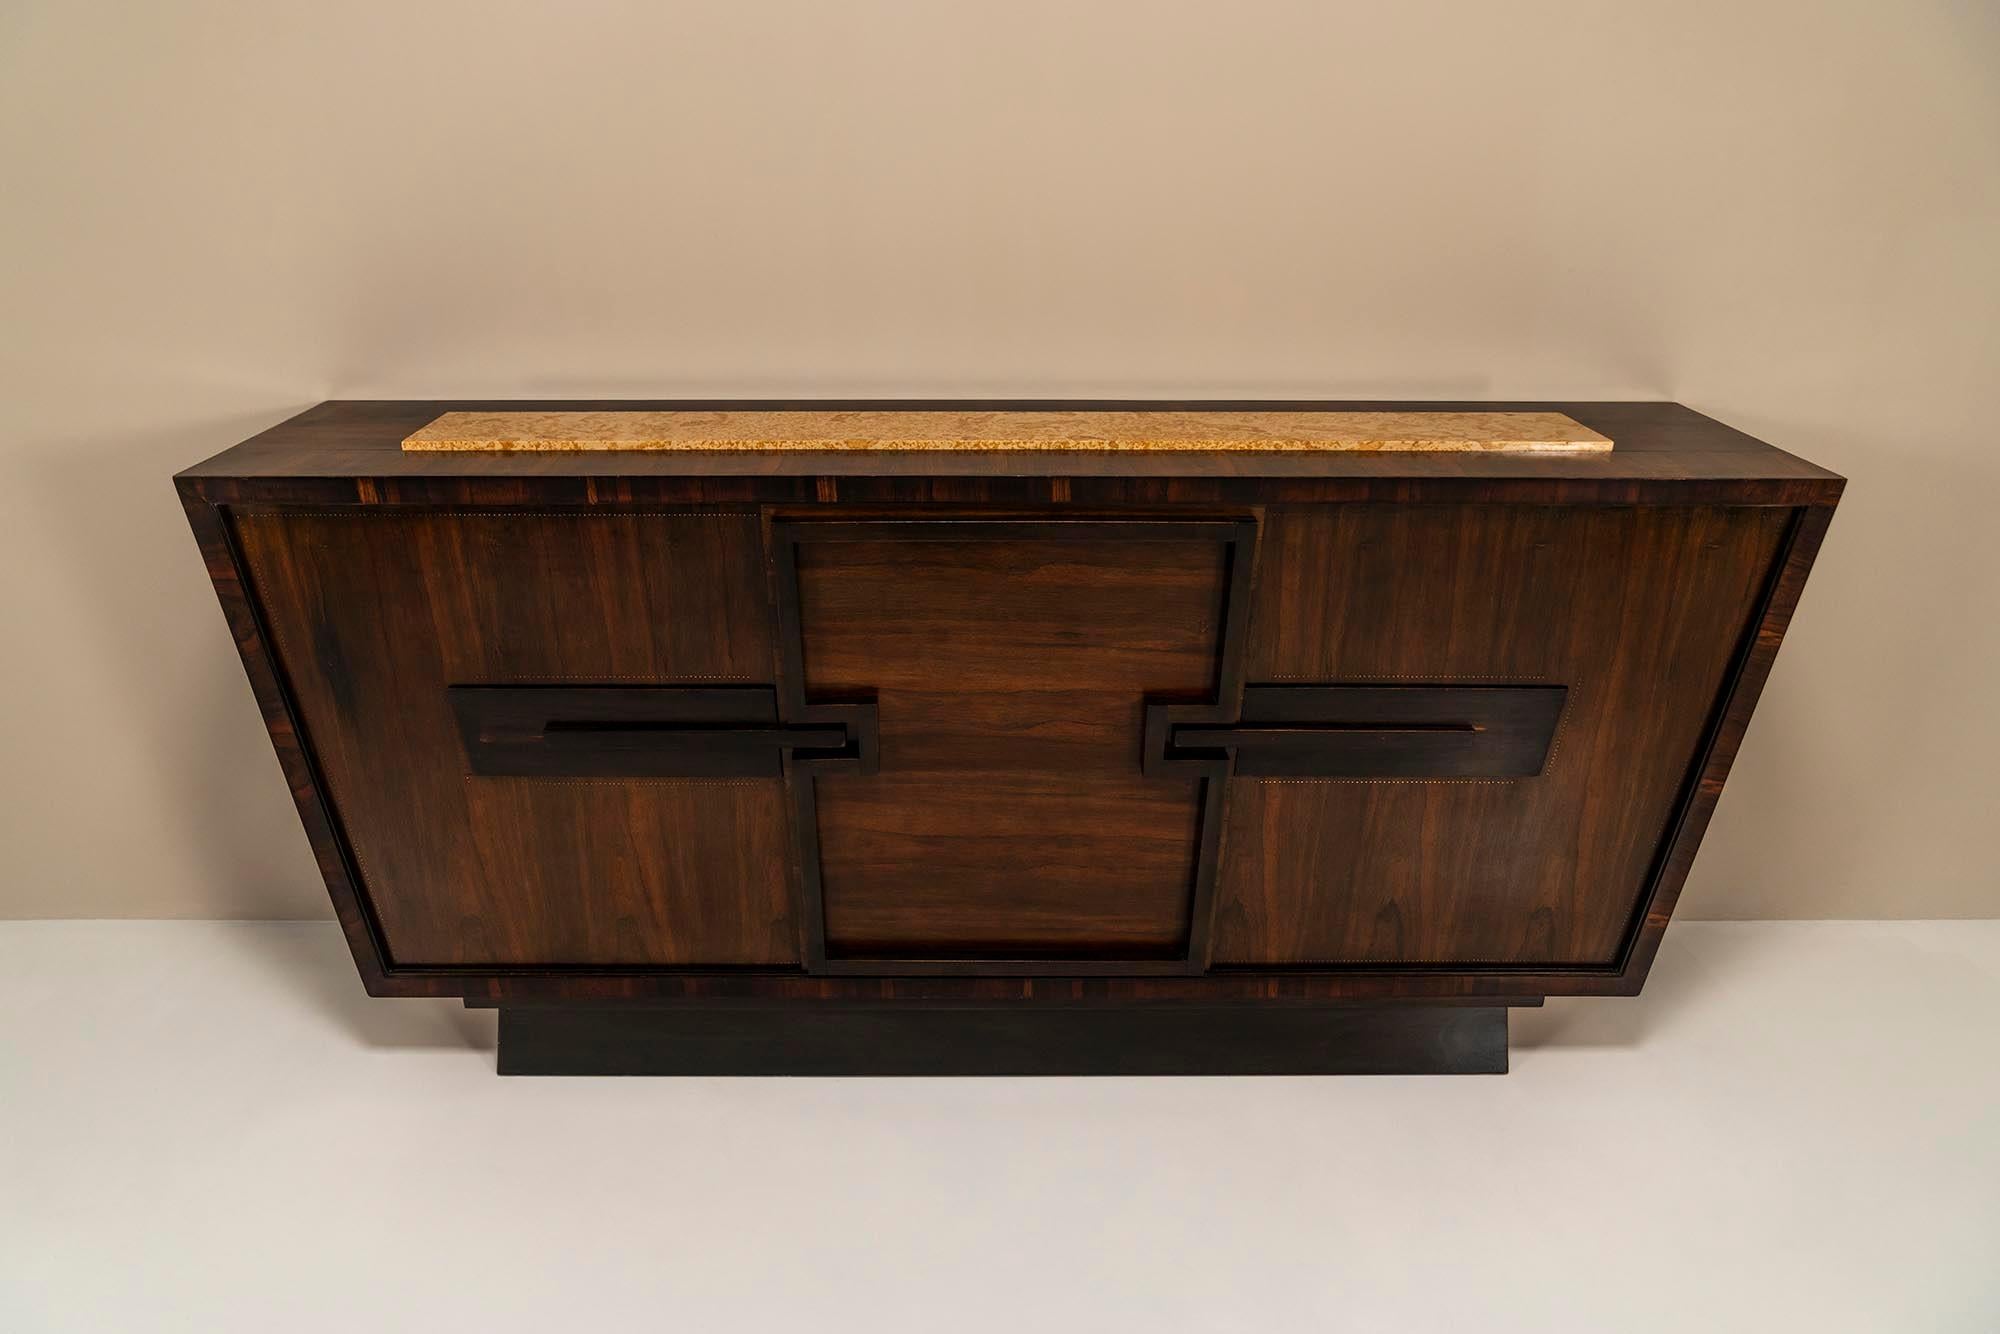 Modernist Sideboard In Studded Rosewood By Andre Sornay, France 1940s For Sale 5